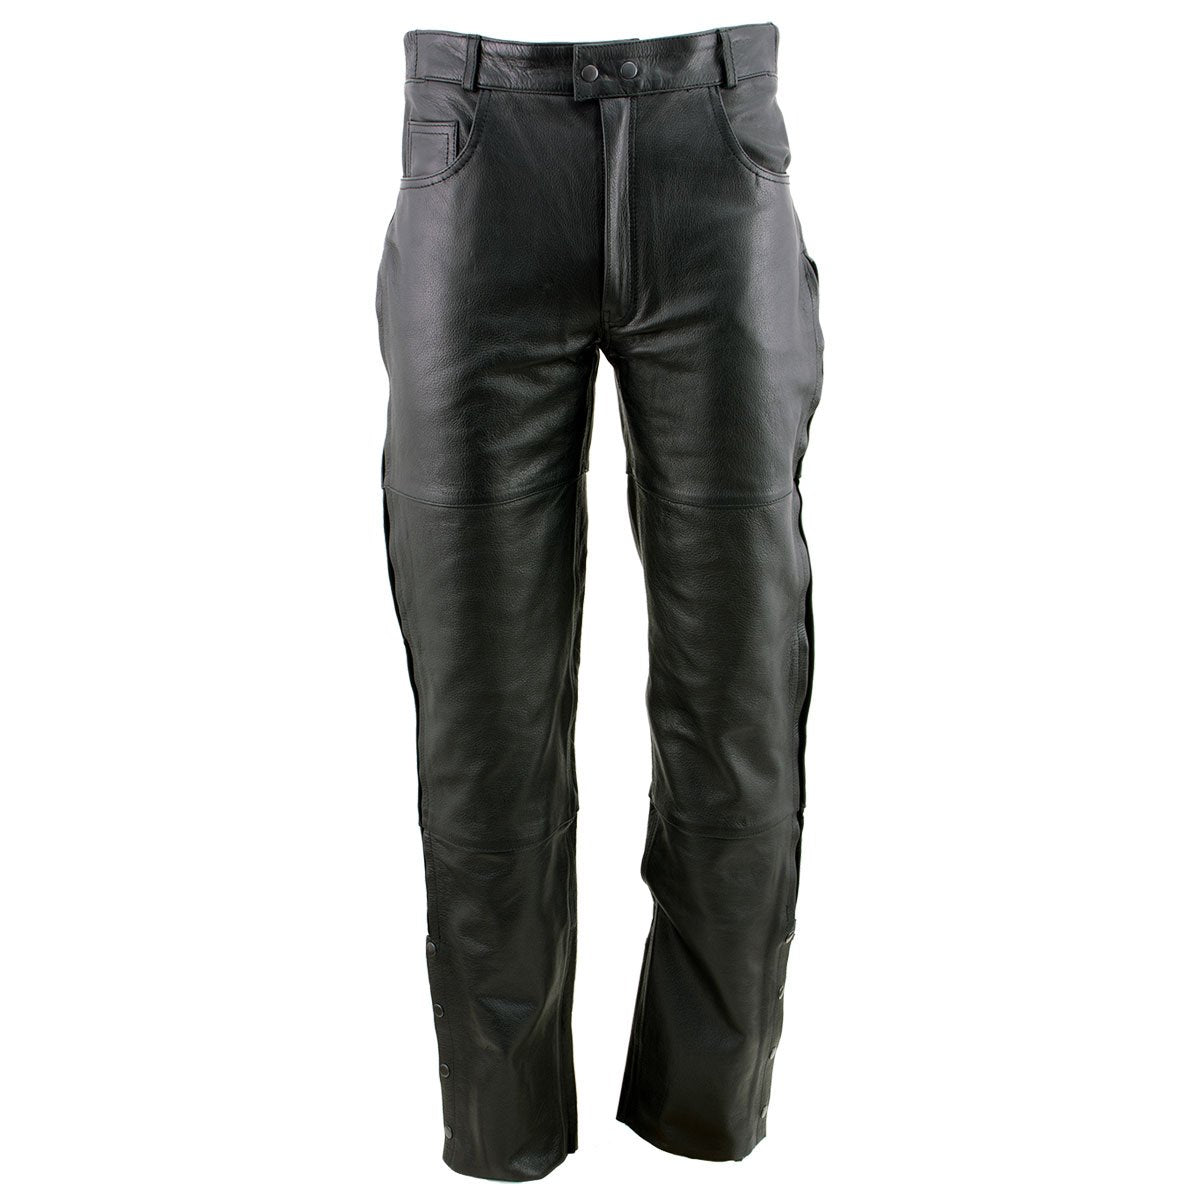 Xelement B7470 Men's Black Premium Leather Motorcycle Over Pants with Side Zipper and Snaps